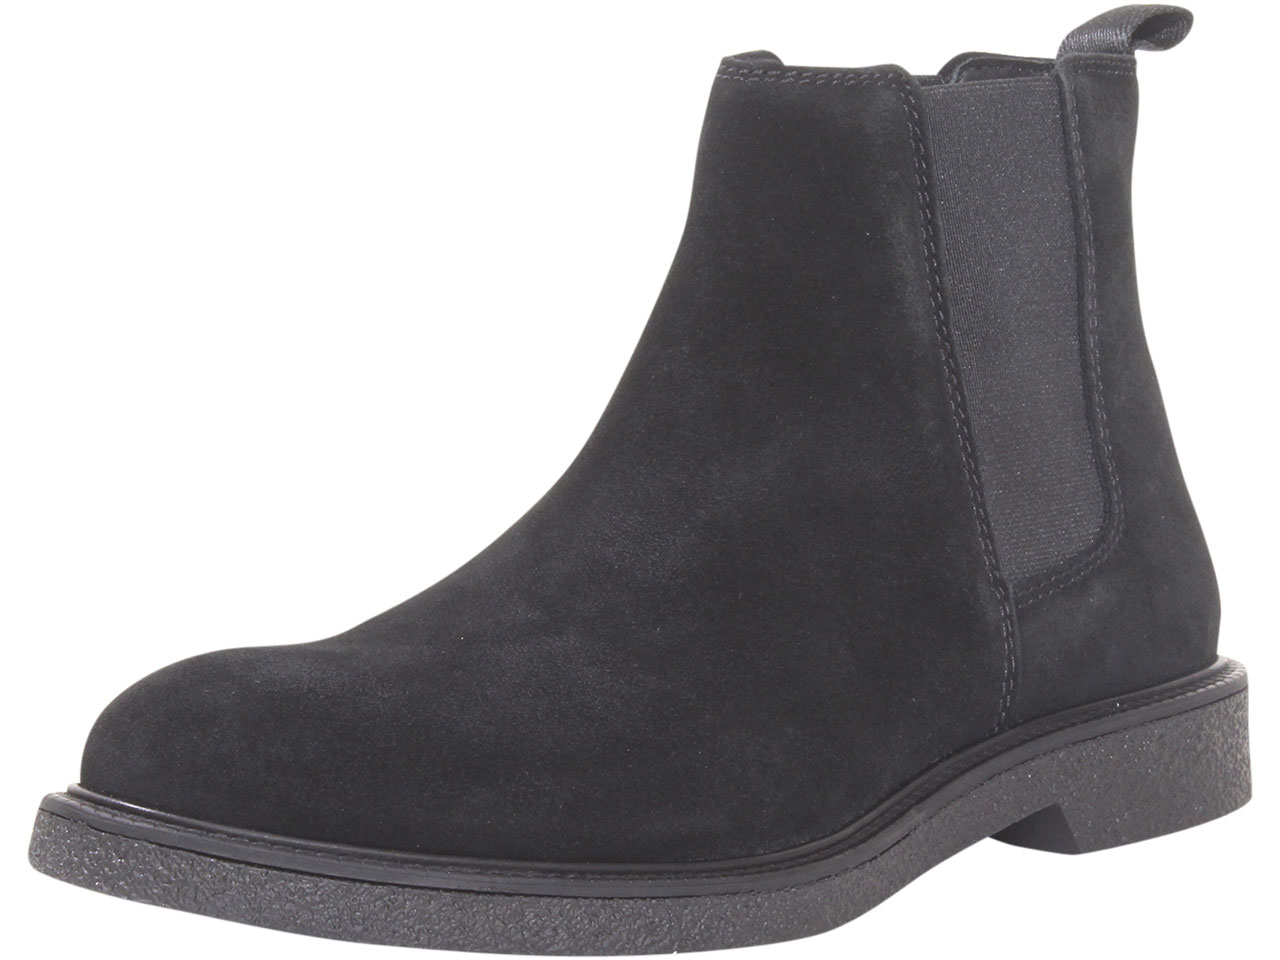 Hugo Boss Men's Chelsea Boots Suede Leather Shoes |